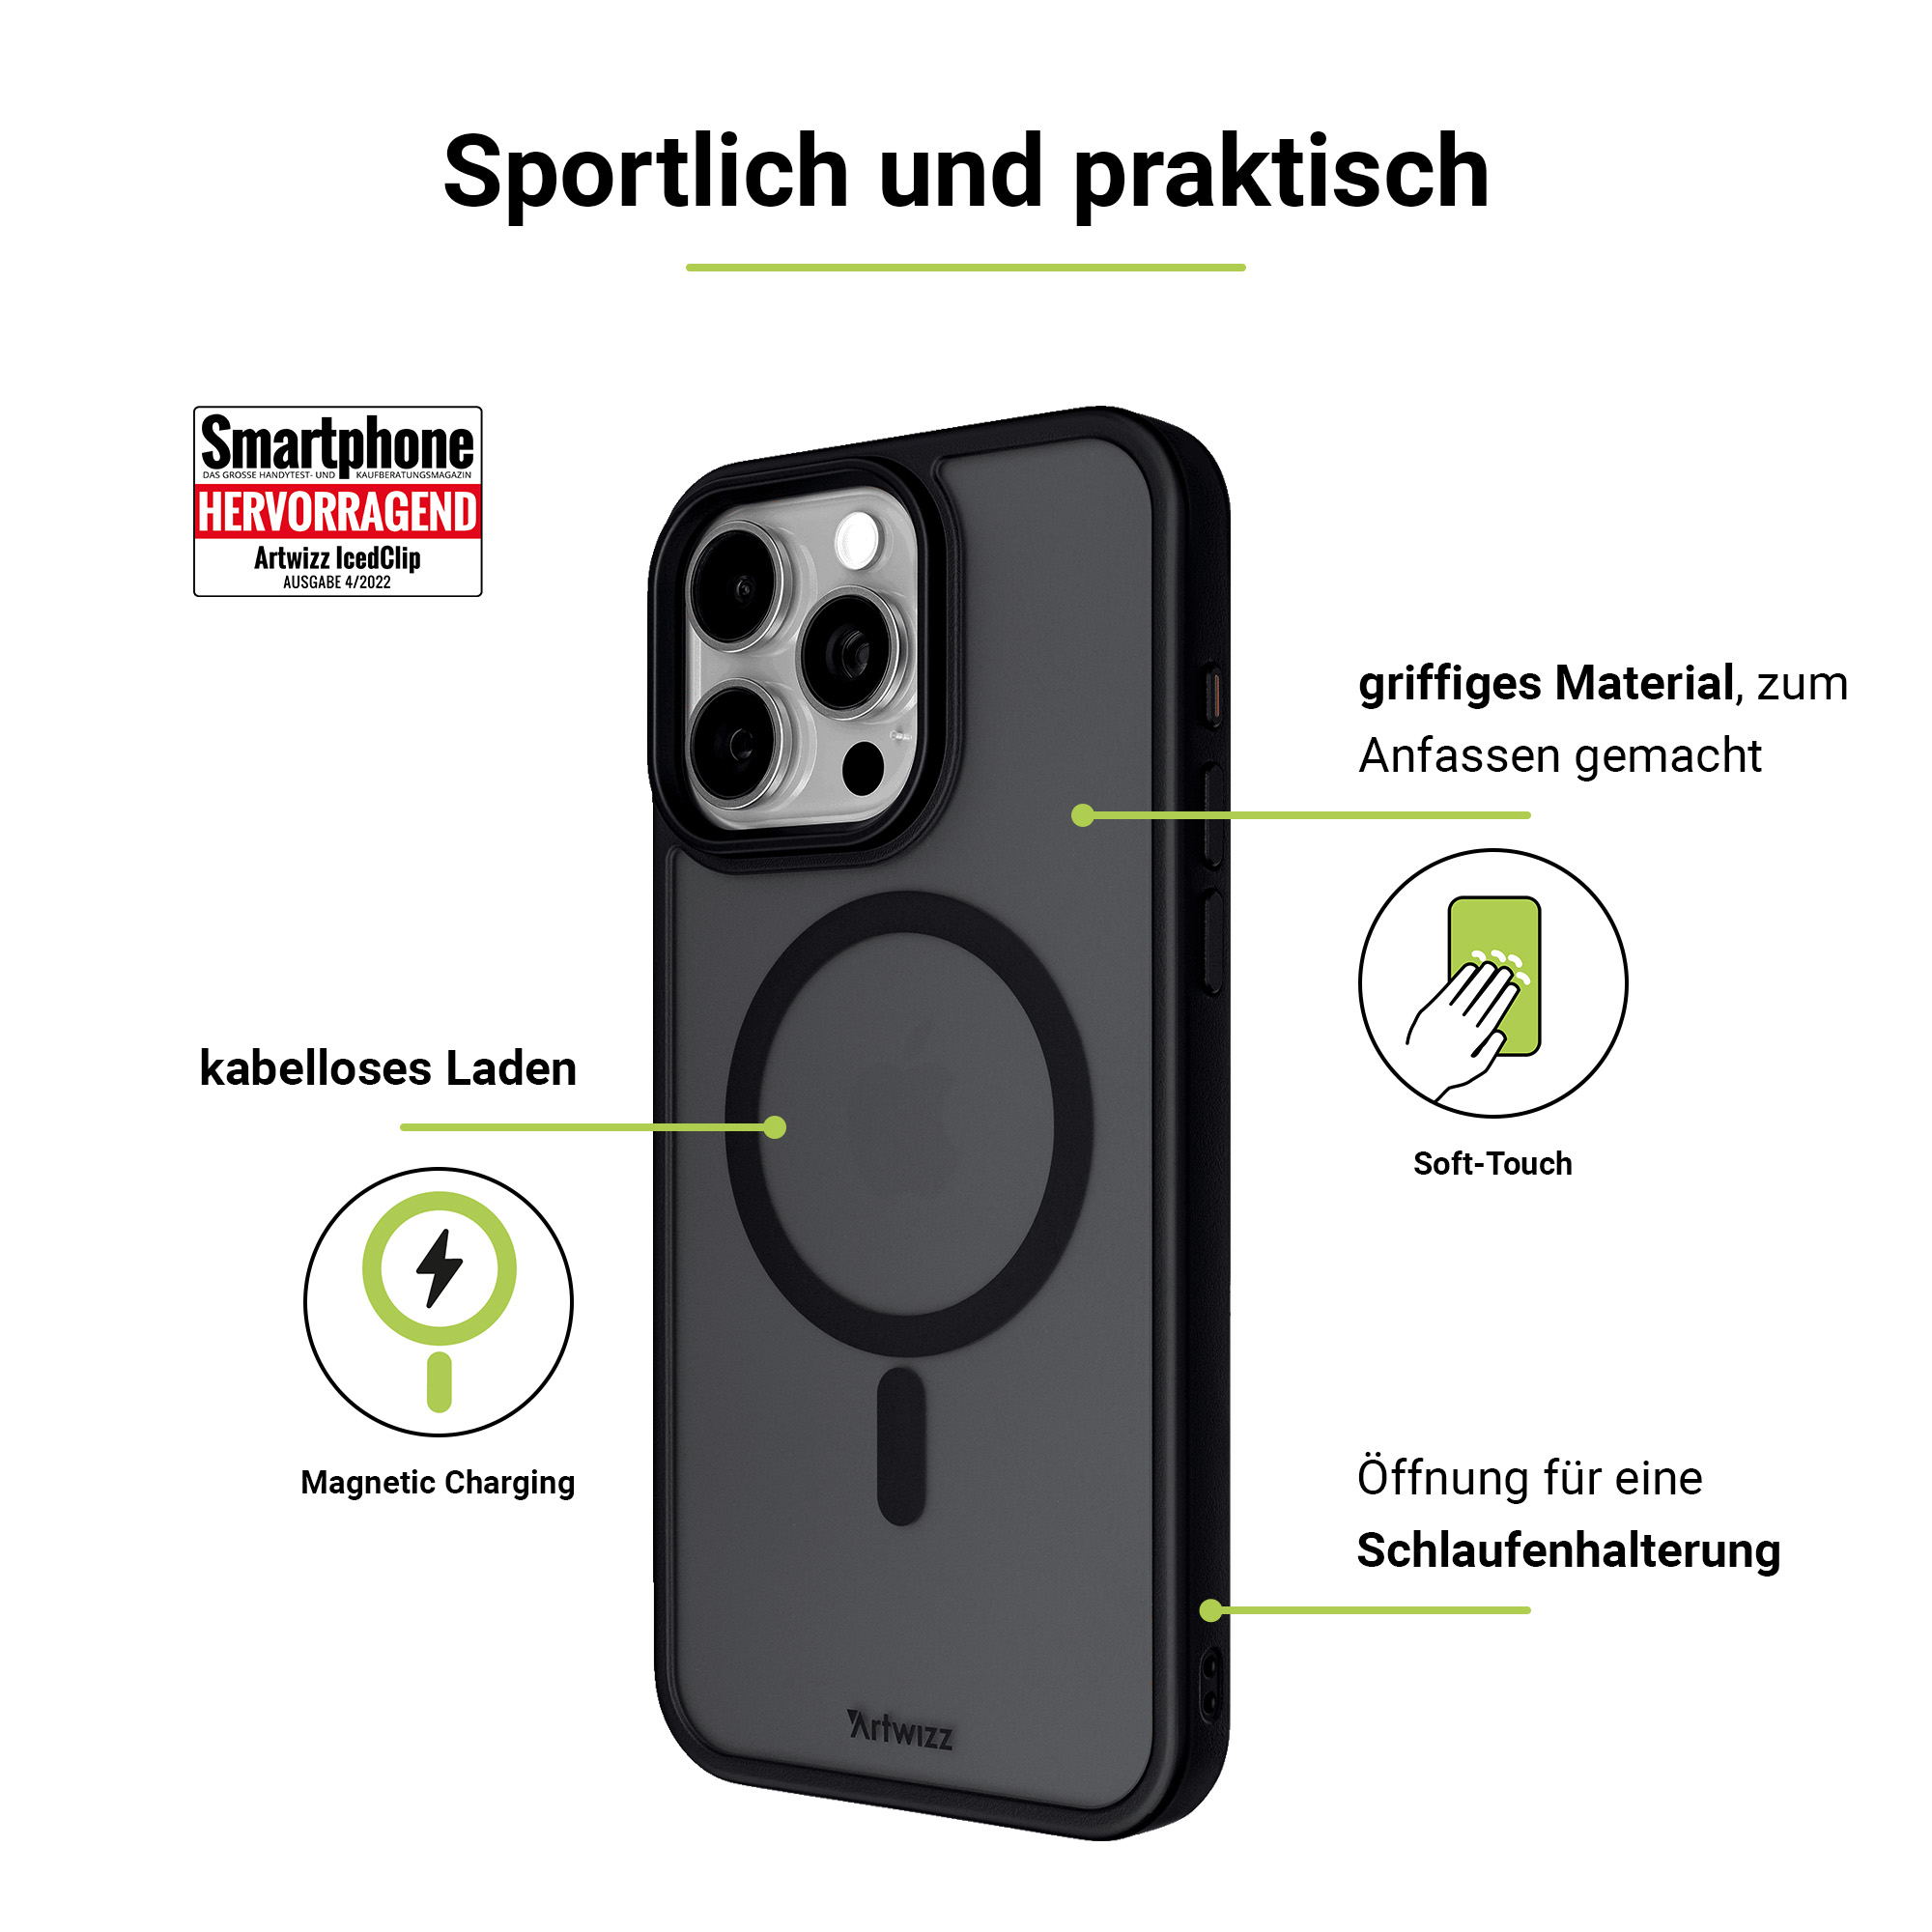 ARTWIZZ IcedClip +CHARGE, Backcover, Apple, Schwarz iPhone 15 Max, Pro